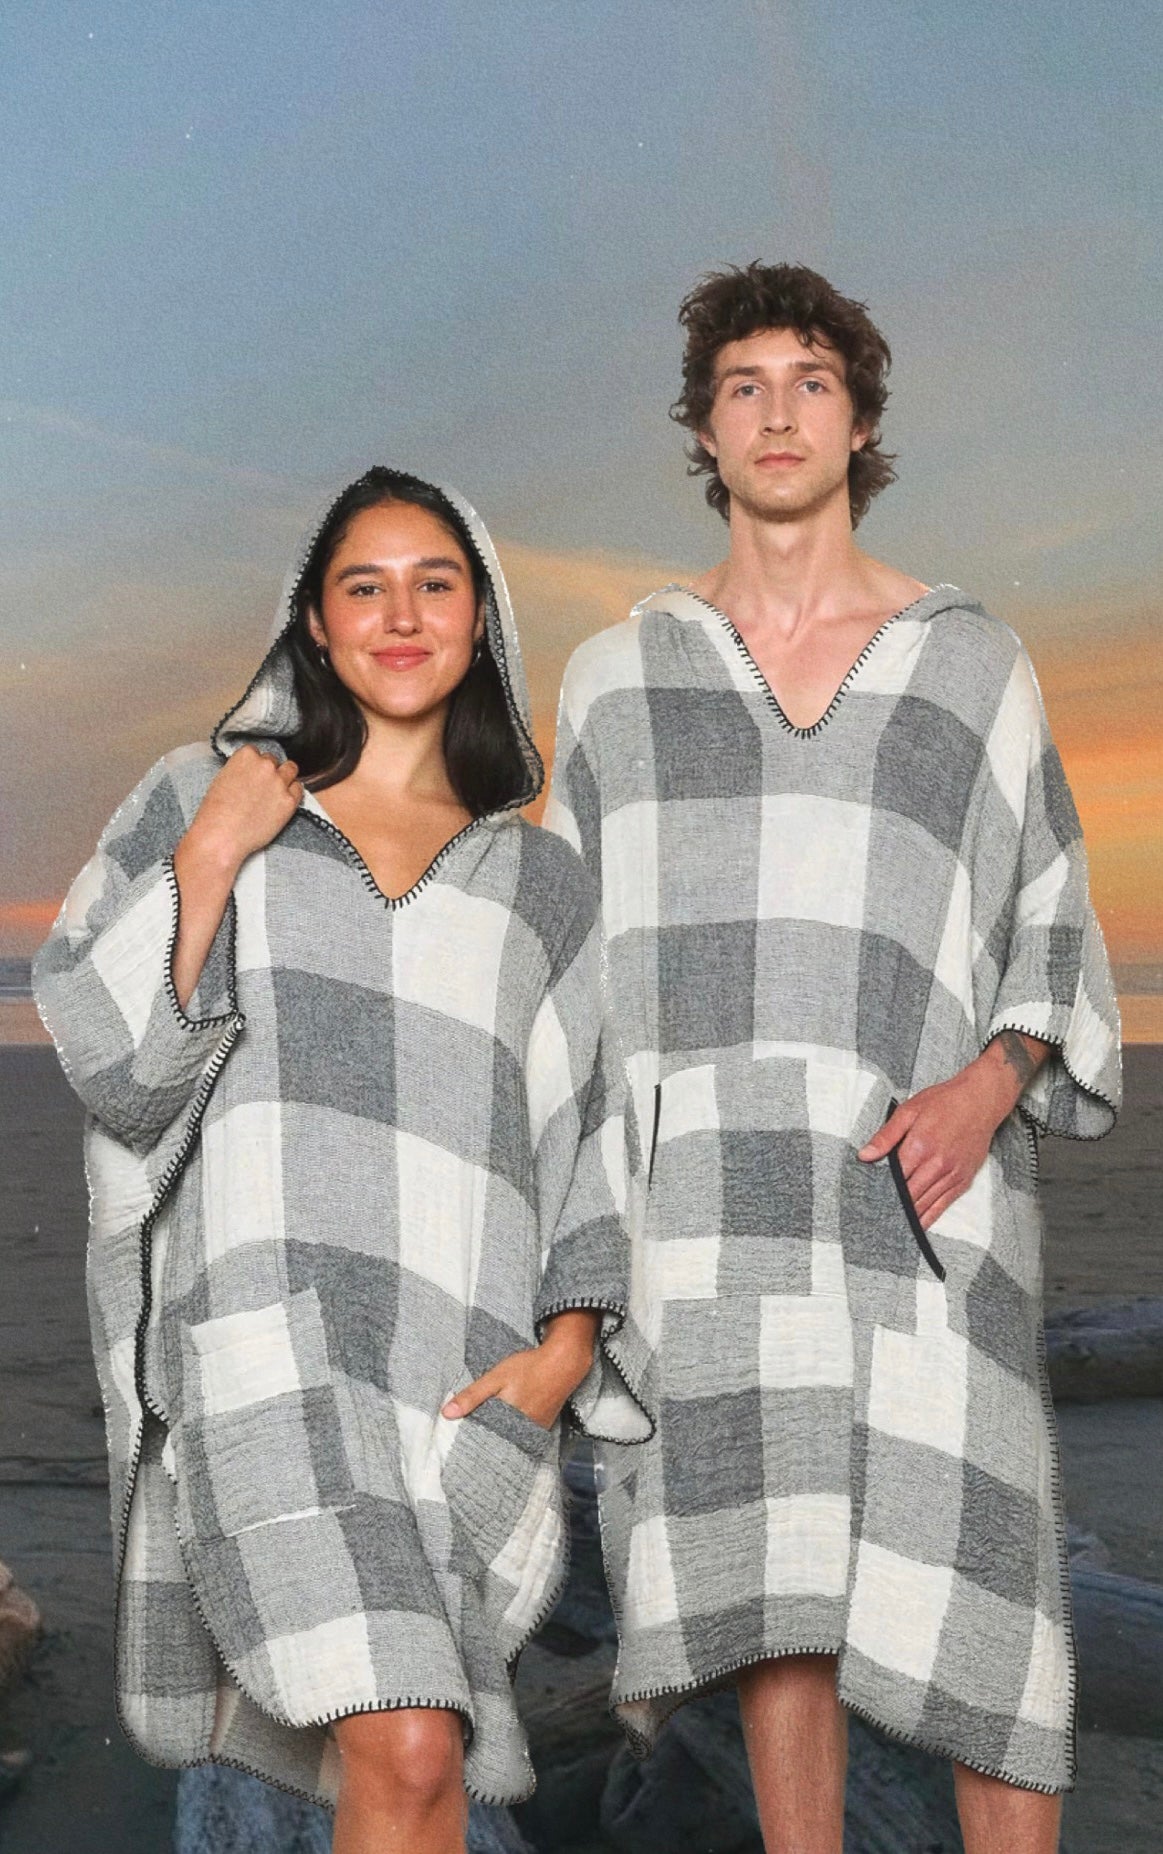 Cocoon Surf Poncho